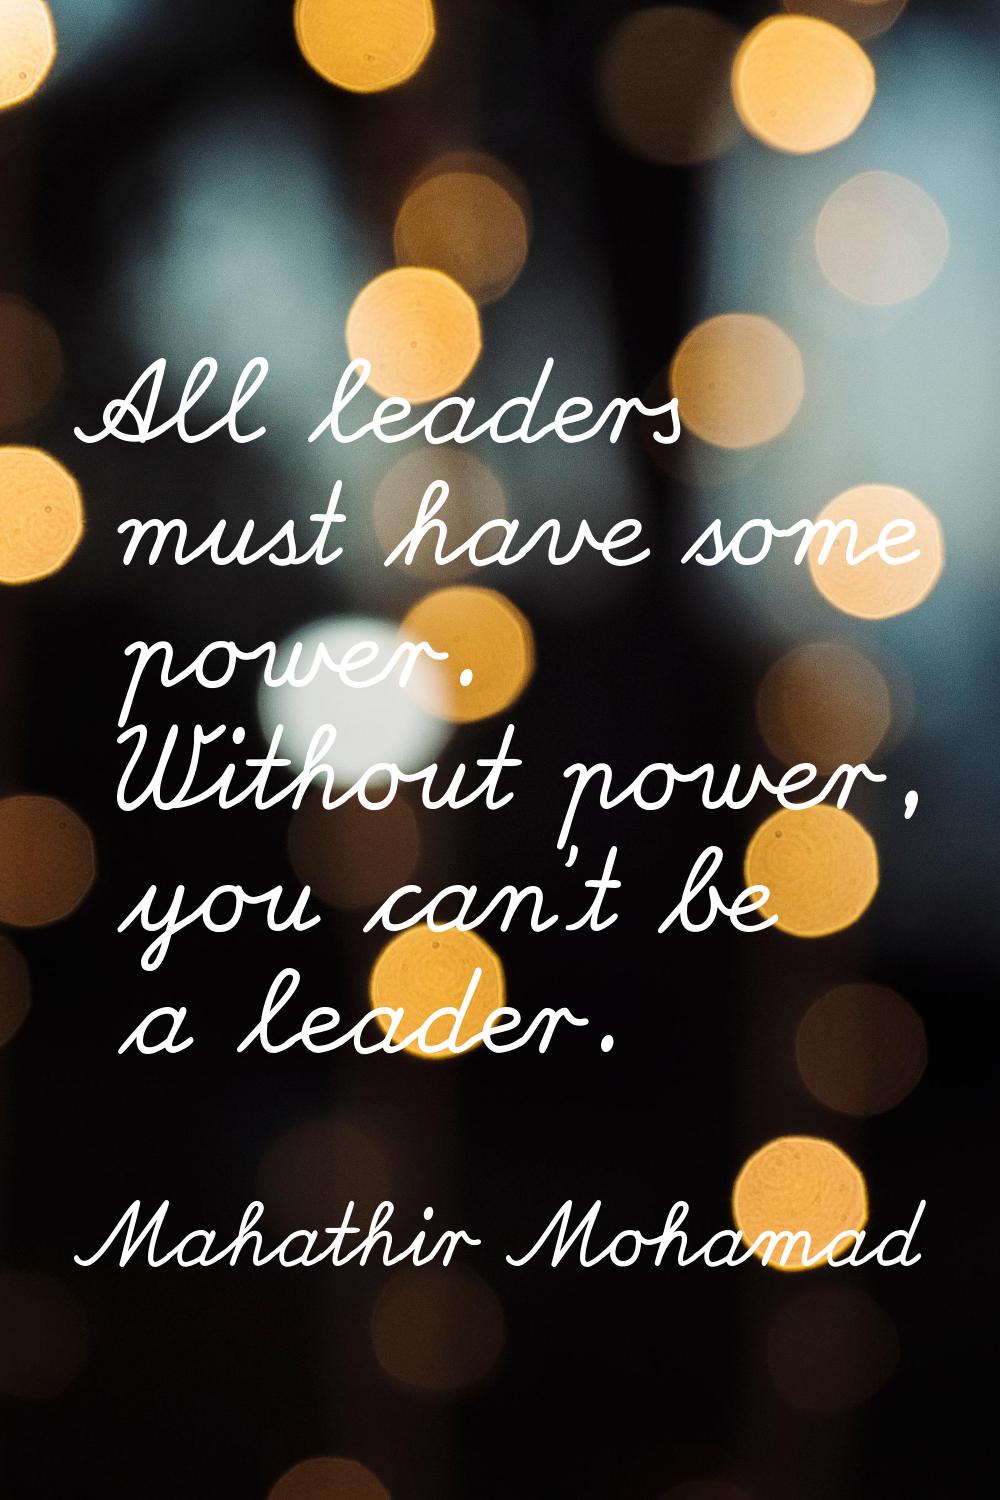 All leaders must have some power. Without power, you can't be a leader.